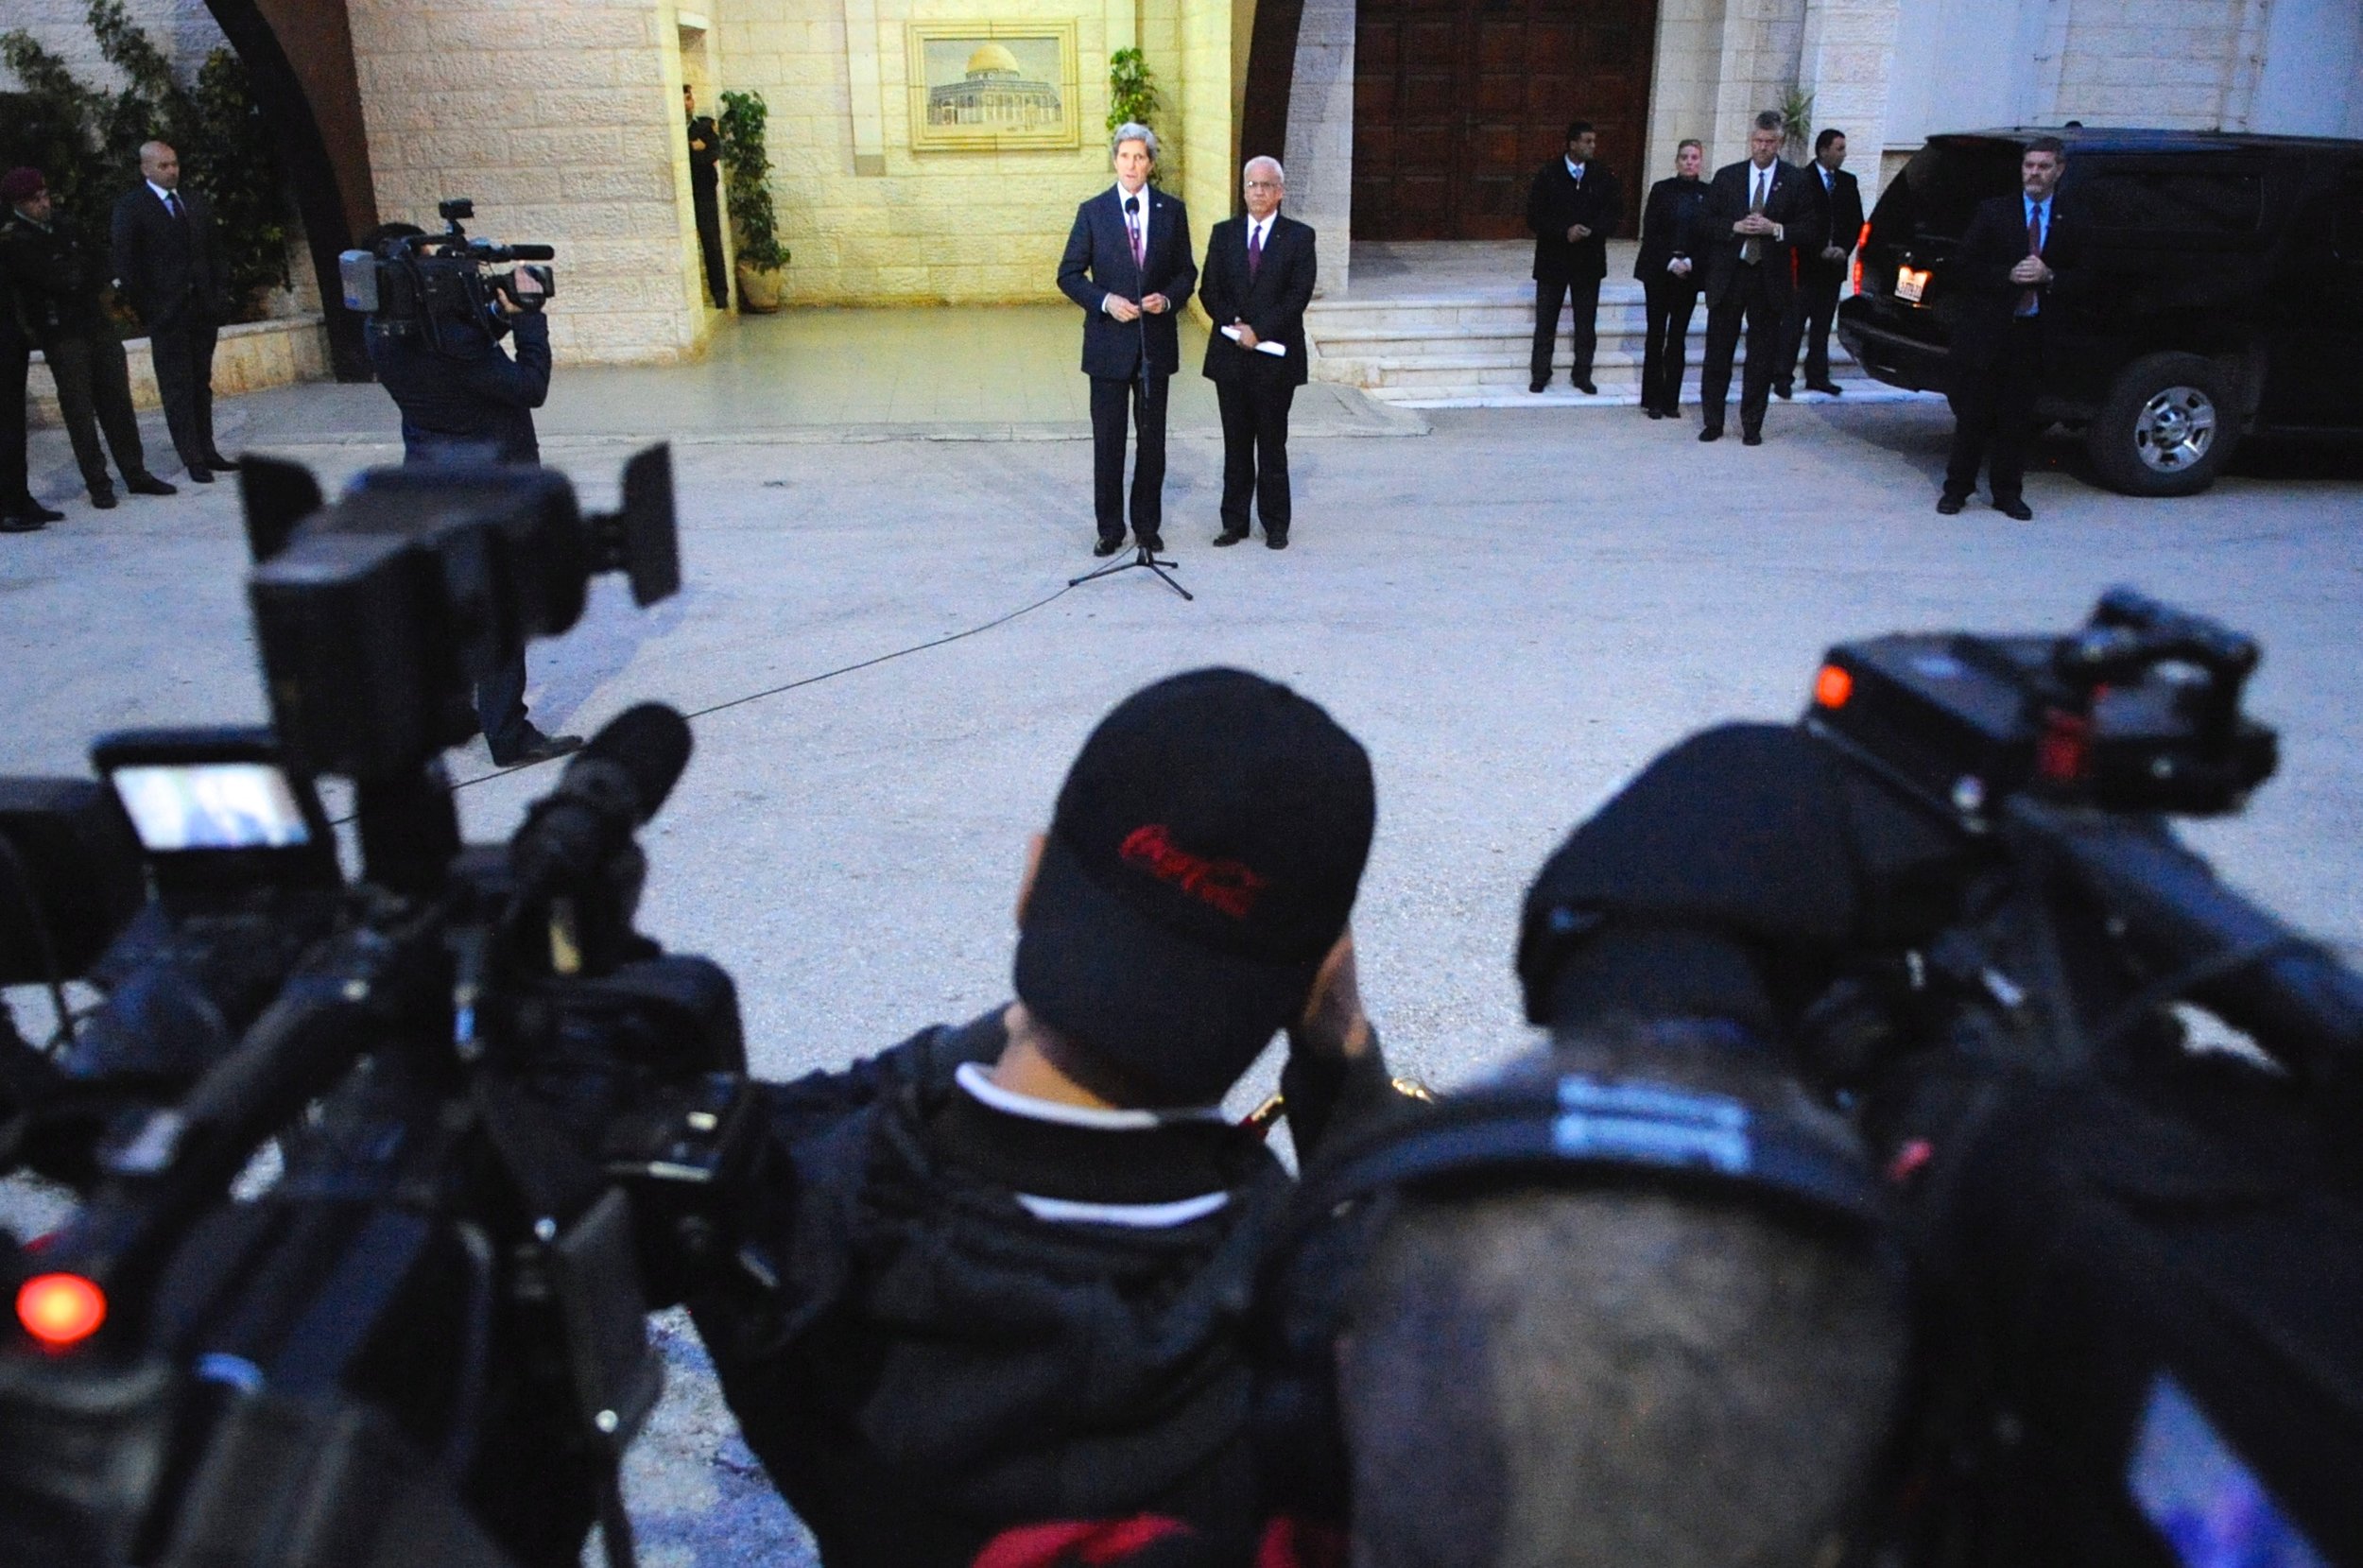  Secretary Kerry and Saeb Arakat address reporters outside the Palestinian Authority Headquarters in Ramallah, West Bank. 